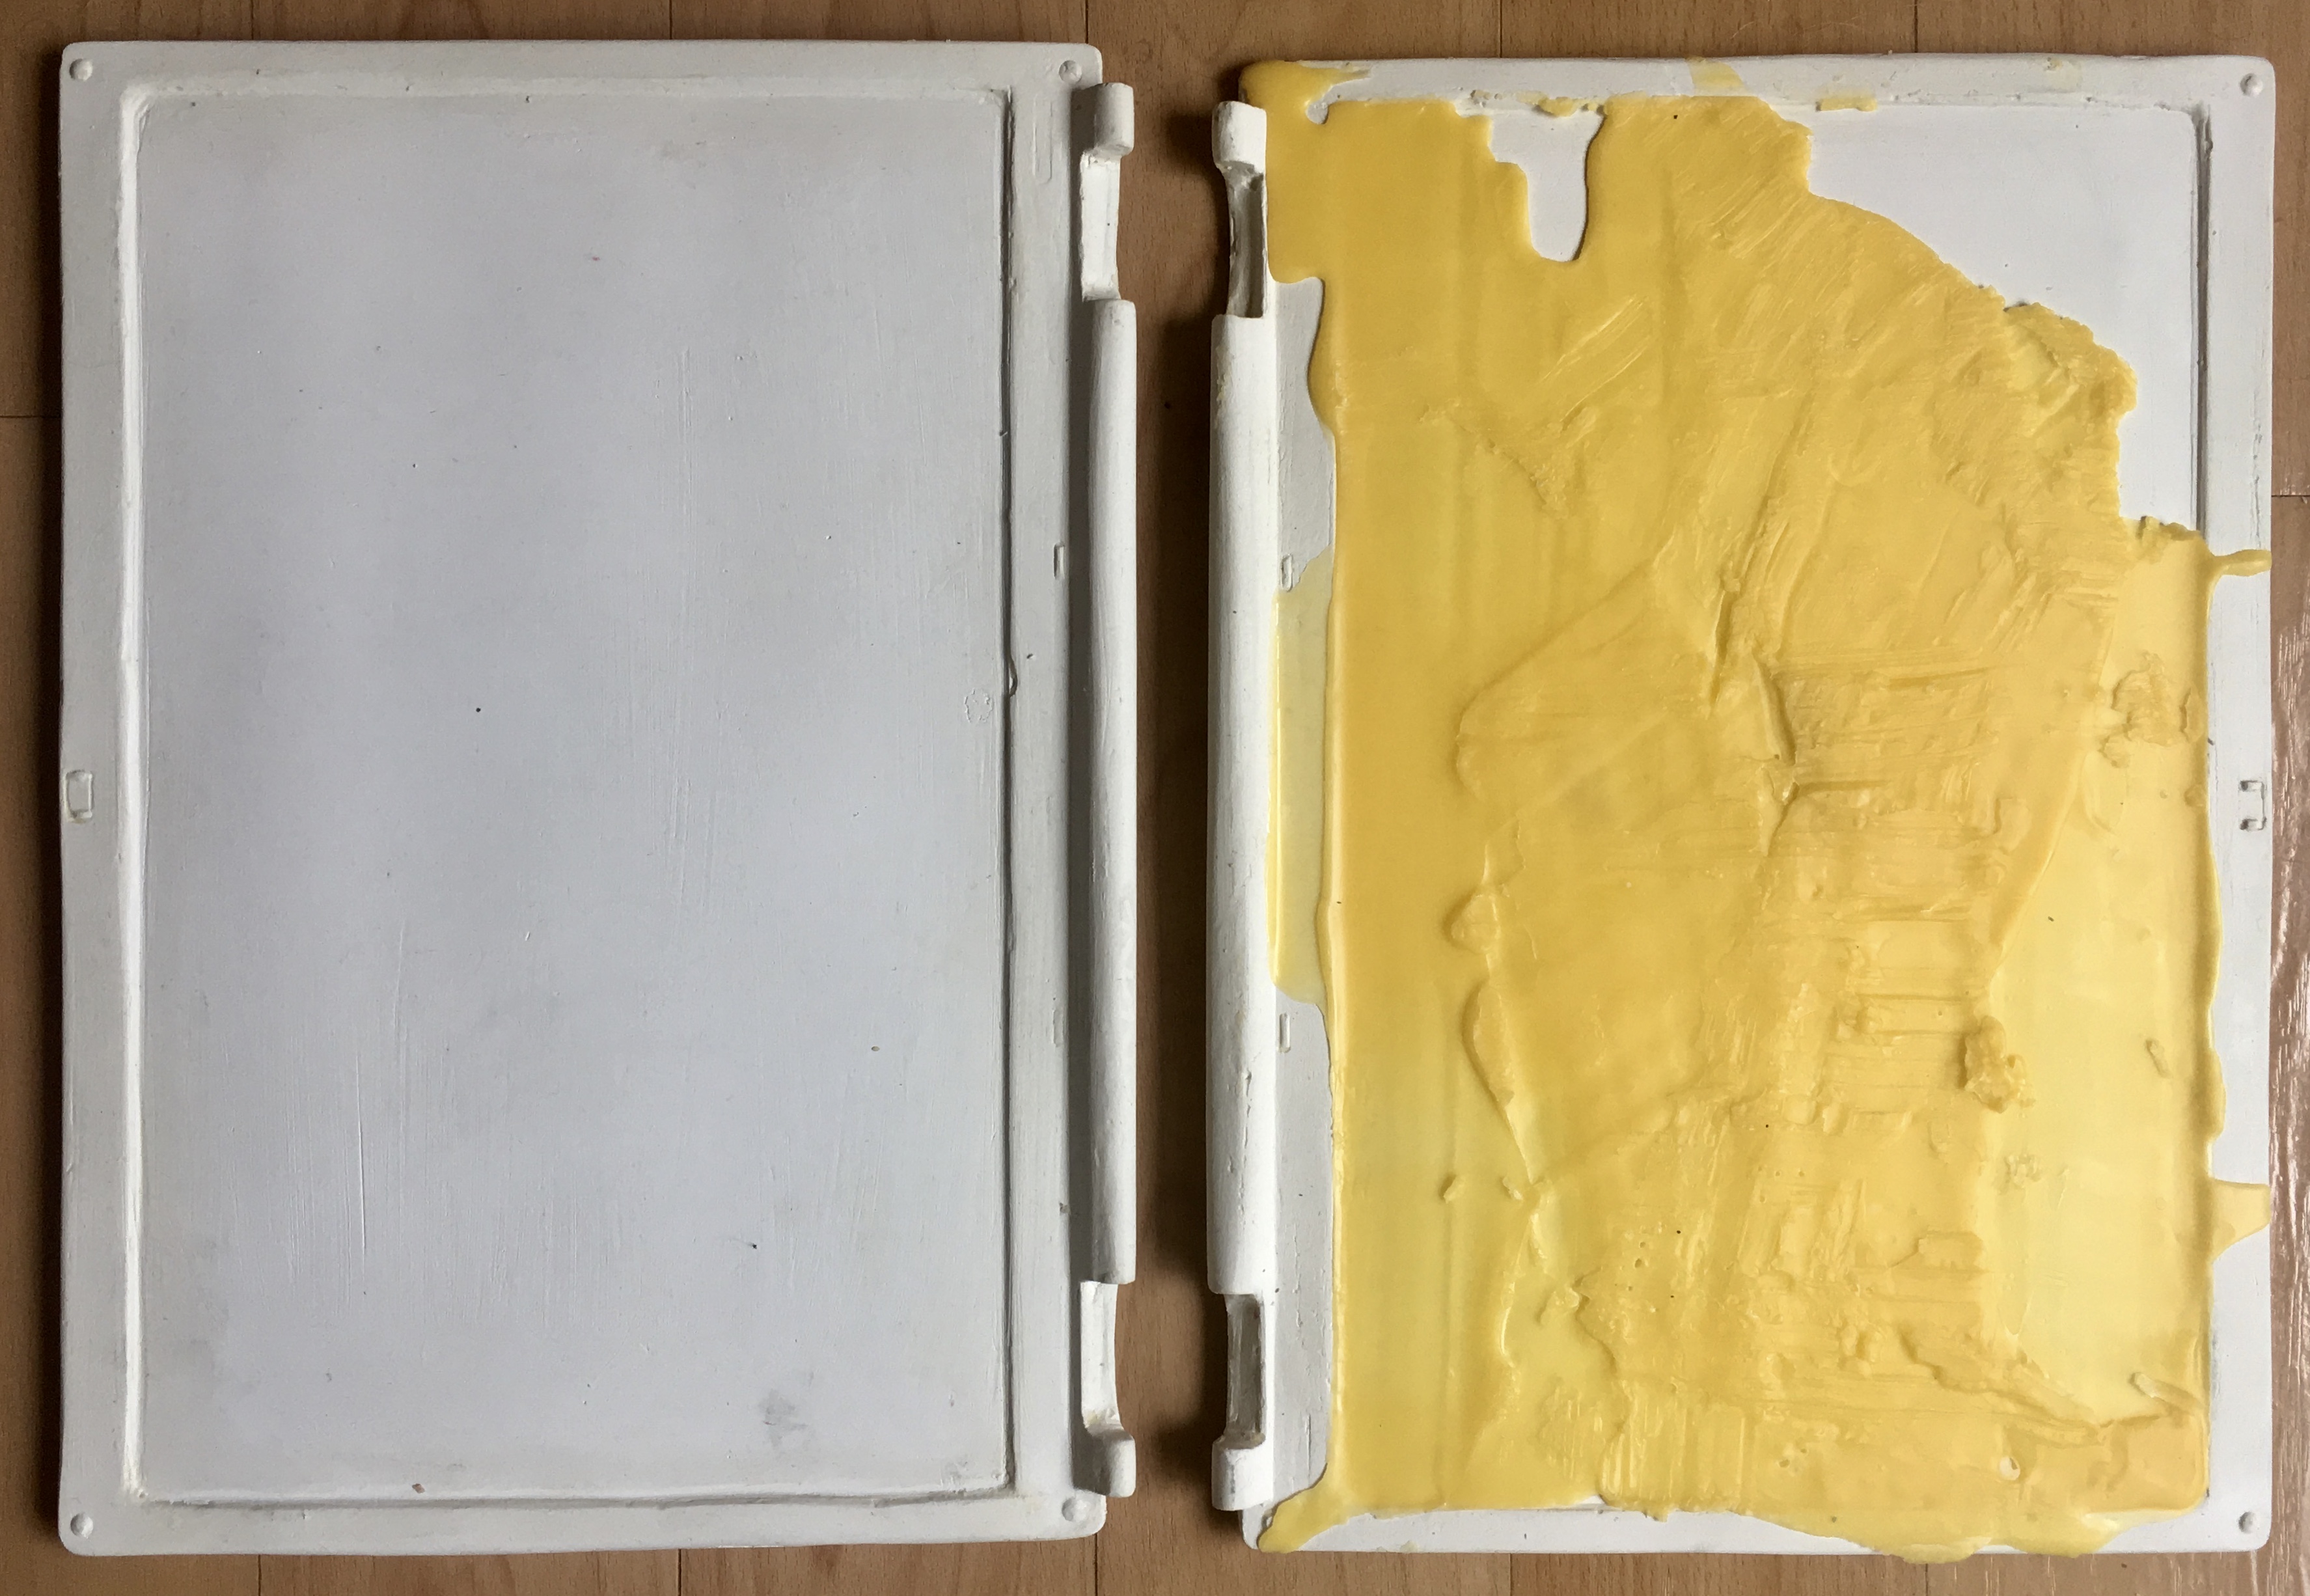 Diptych – 2nd Iteration